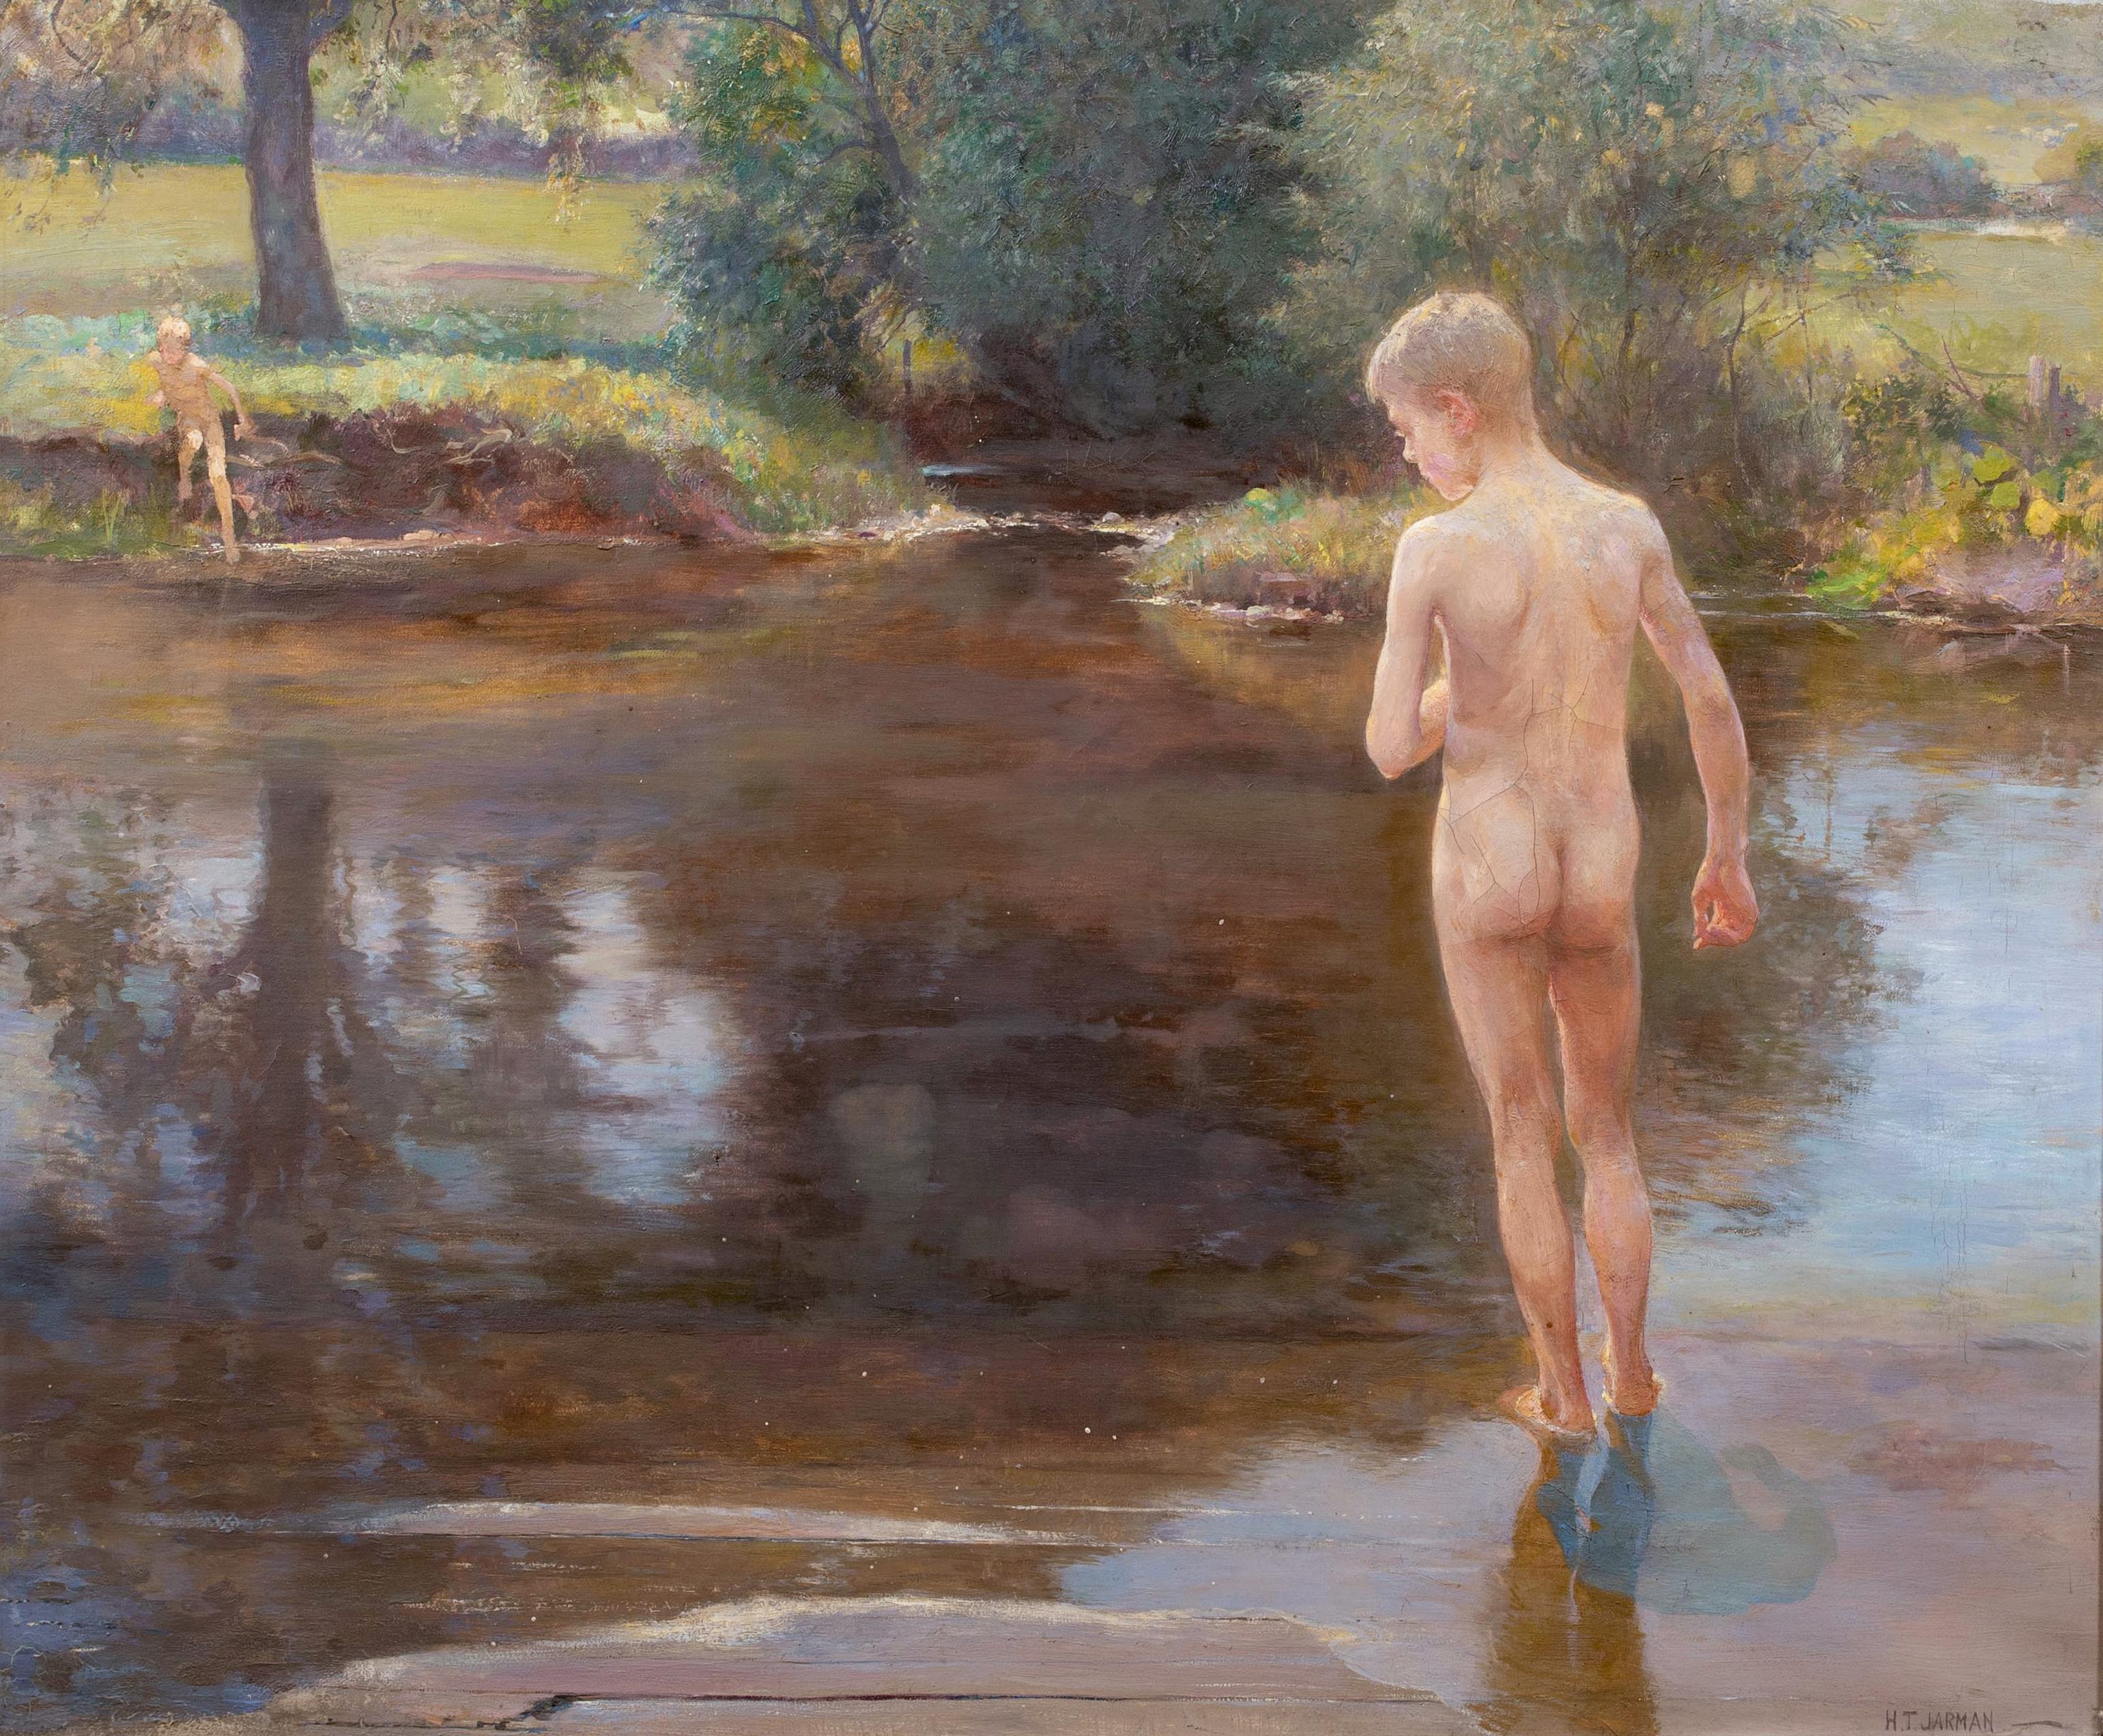 Nude Boys At A Lake, circa 1920

by Henry Thomas Jarman (1871-1956)

Large circa 1920 scene of two boys paddling by a lake, oil on canvas by Henry Thomas Jarman. Beautiful early 20th century scene of the two naked boys in summer paddling on the